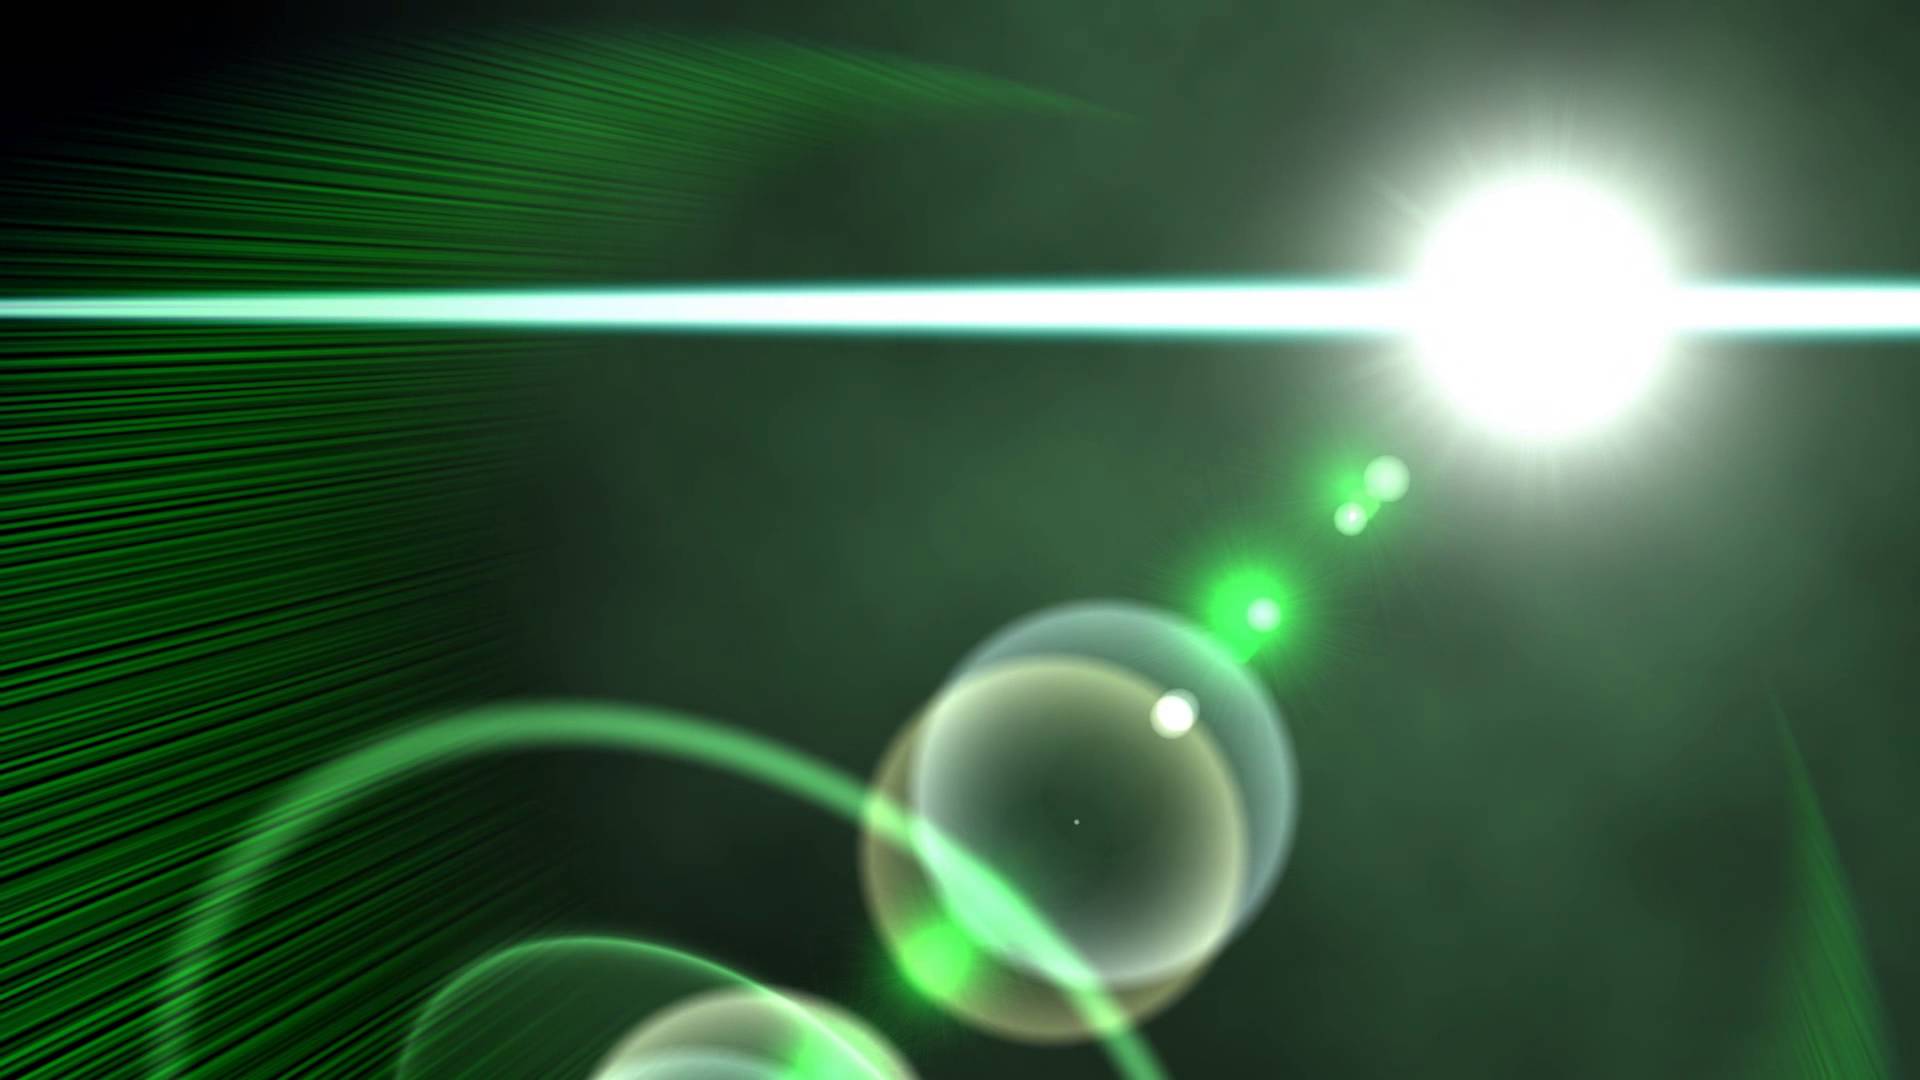 Green Lens Flare Light effect FREE FOOTAGE HD Black Background